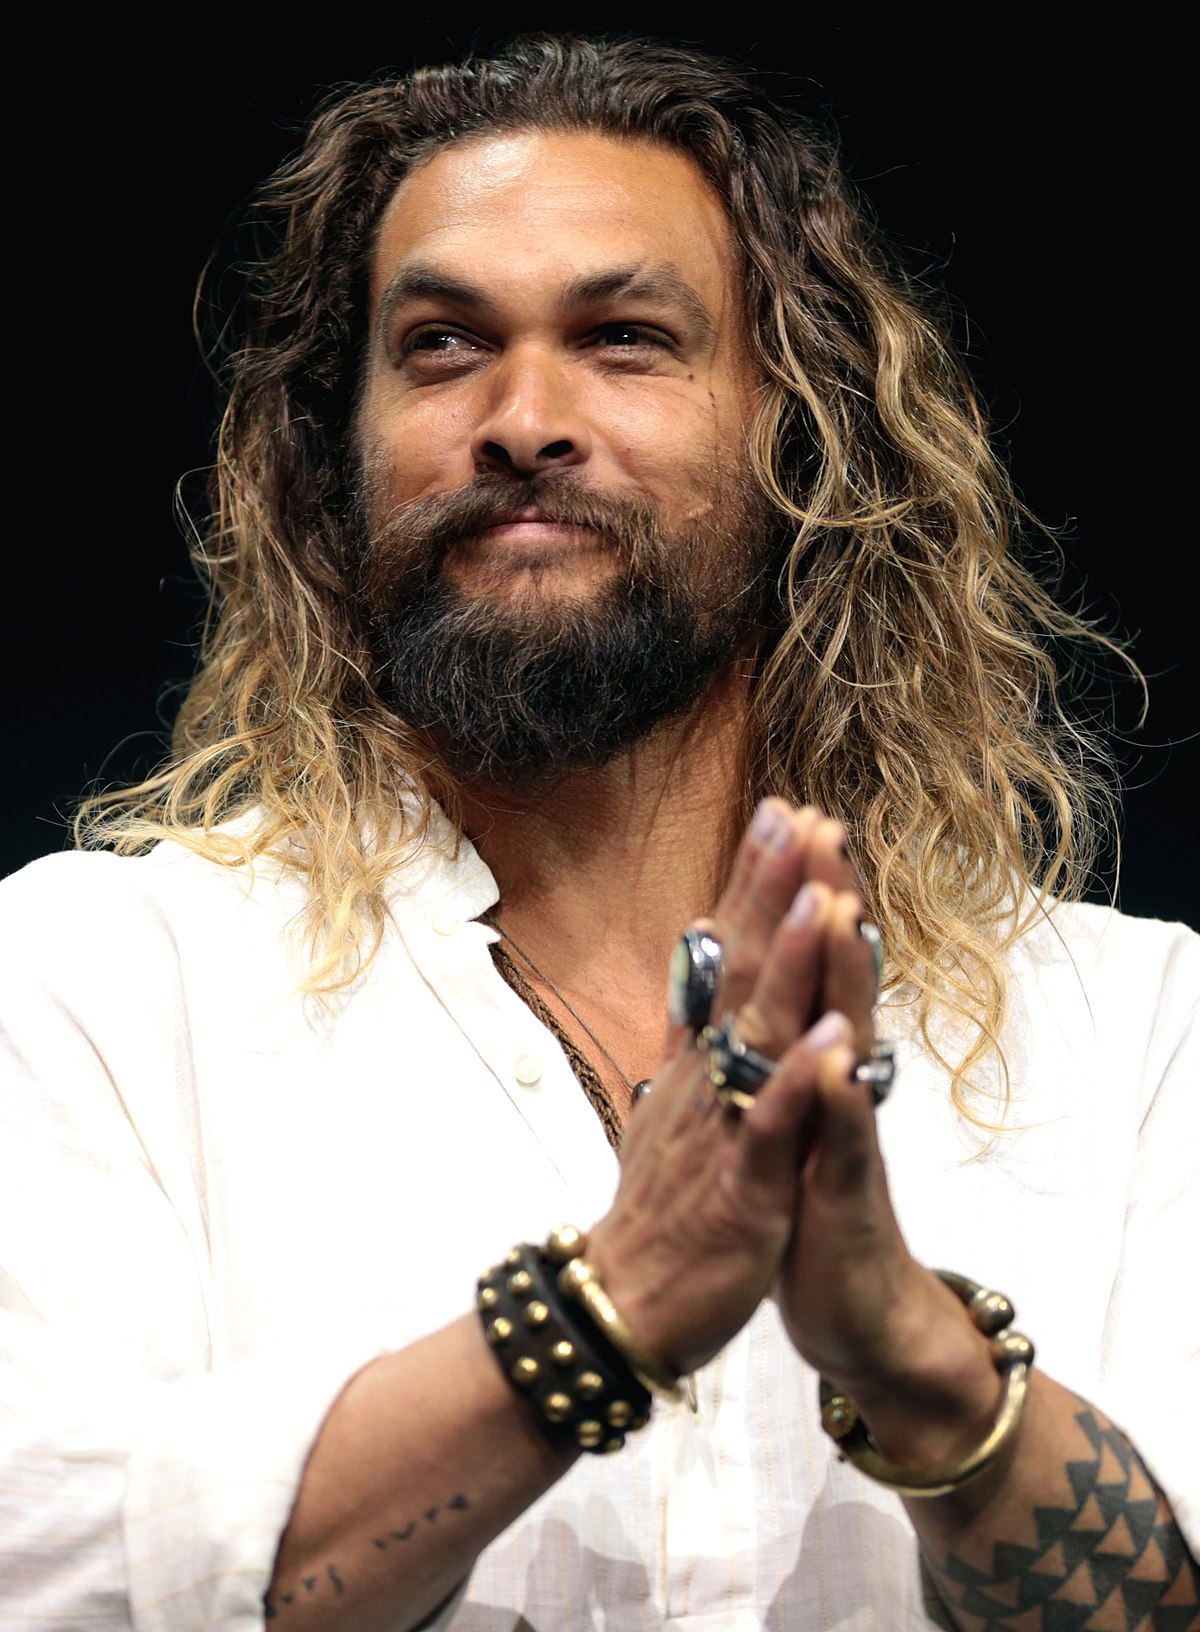 We've Dug Up Some Old Pictures of Jason Momoa and They Are Just as ...